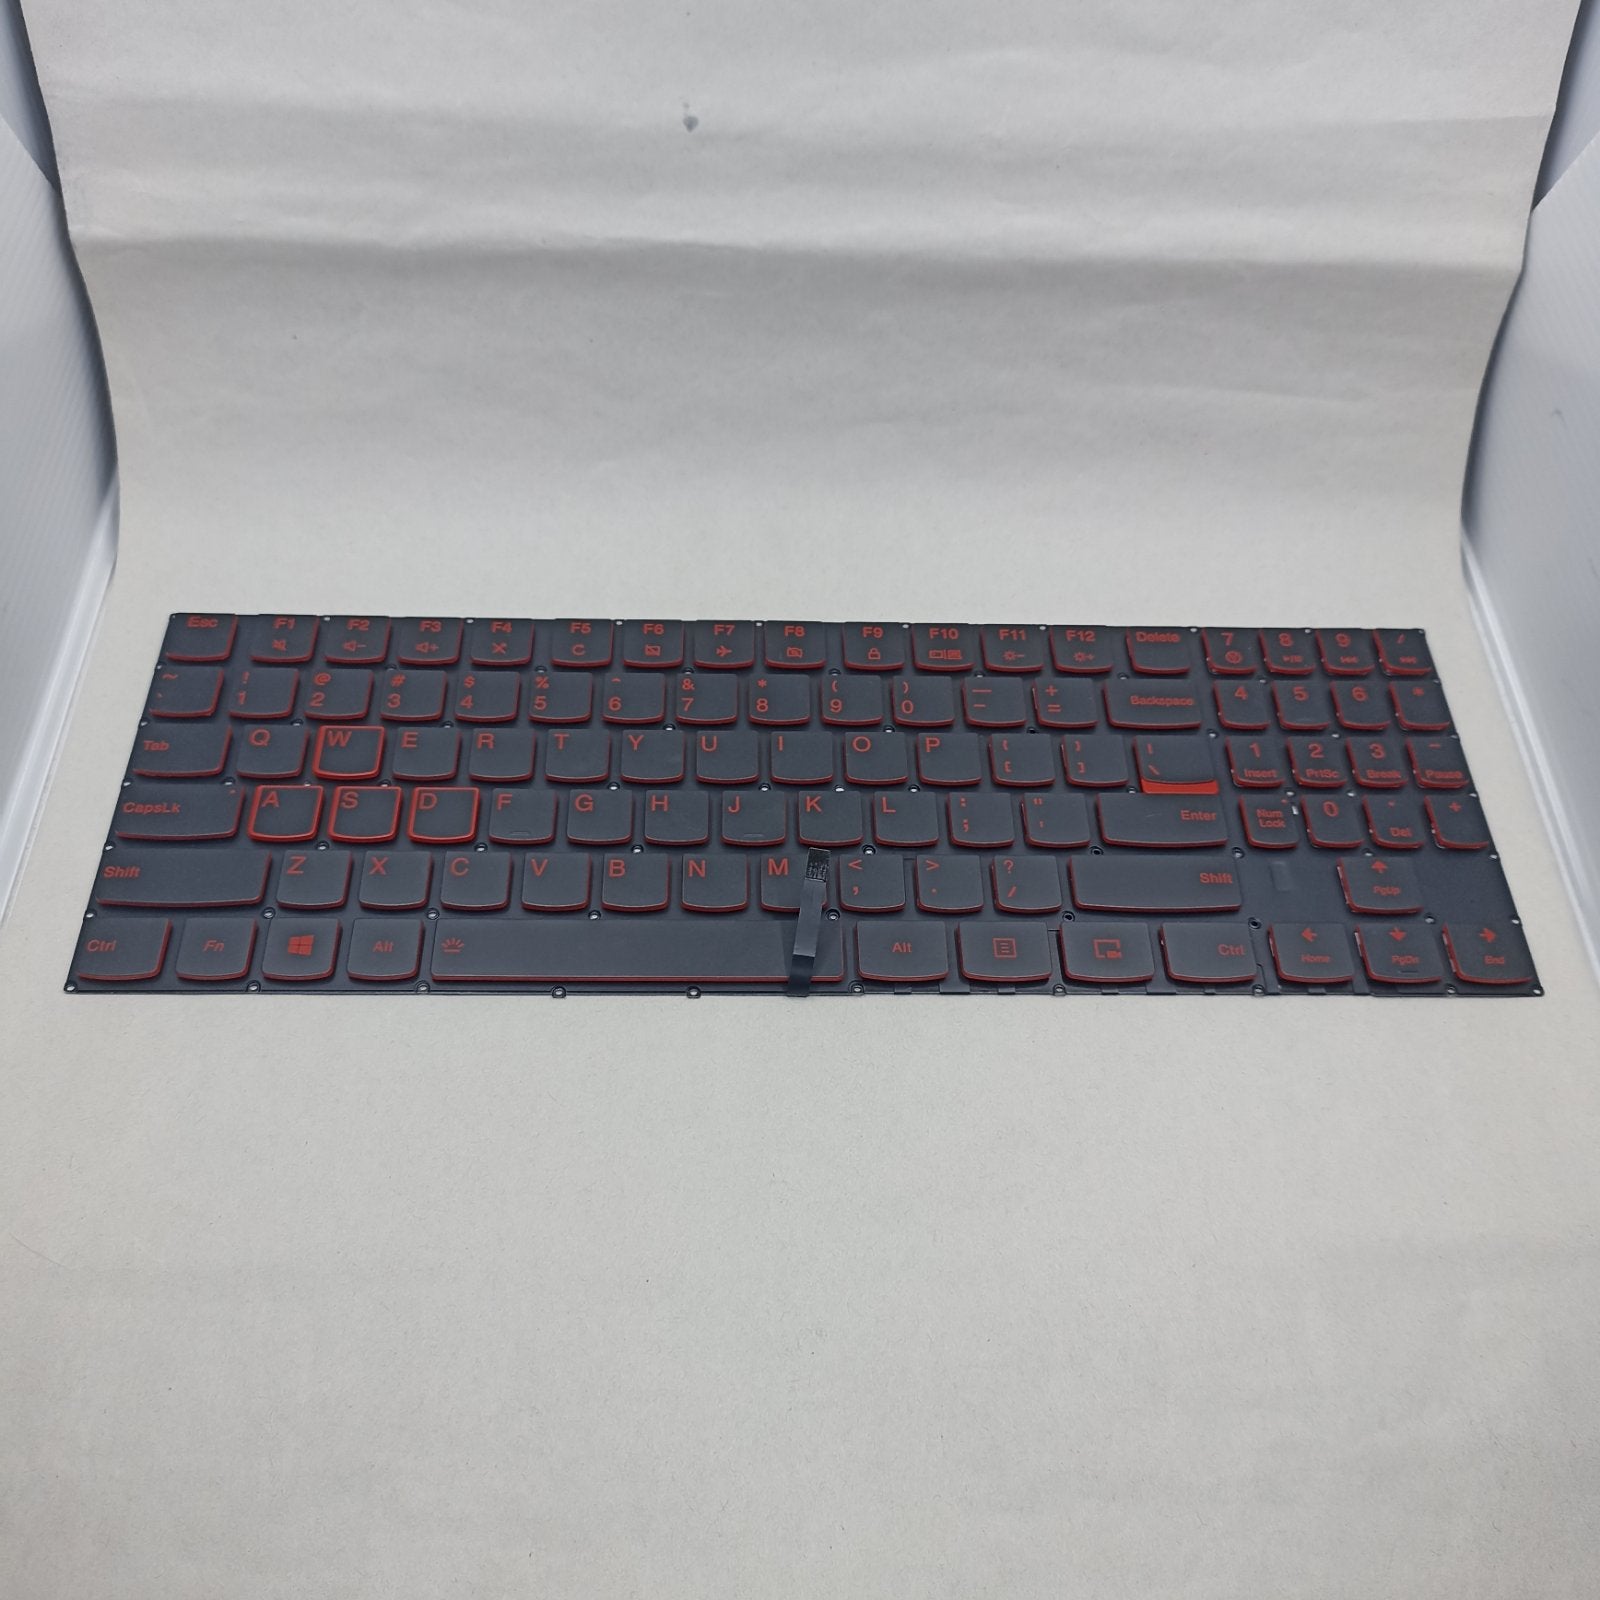 Replacement Keyboard for Lenovo Legion Y540 A1